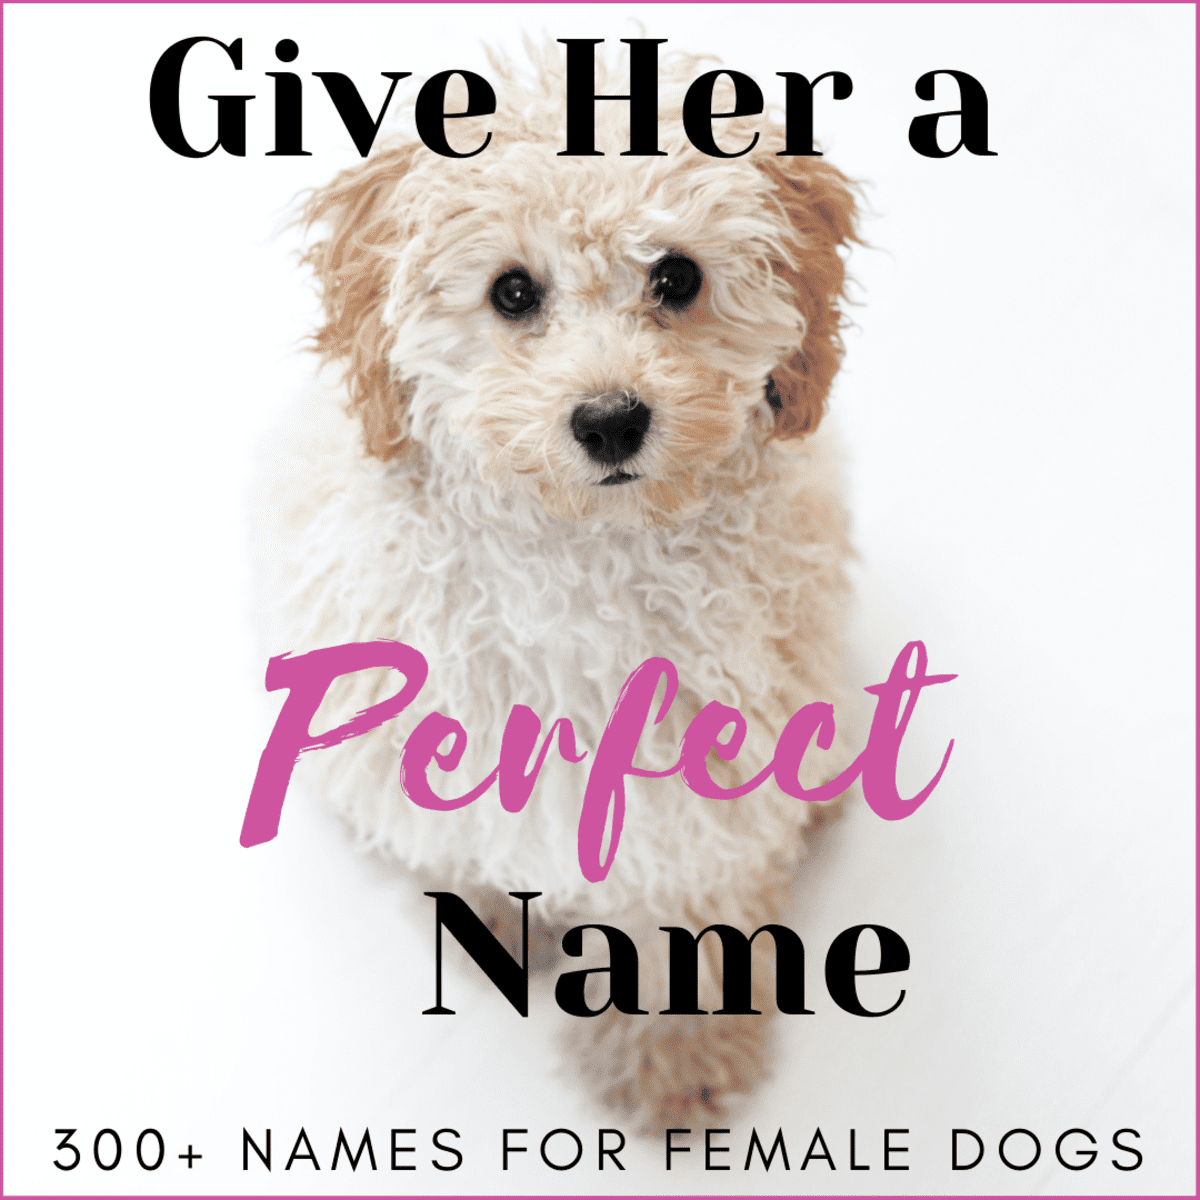 Cool names really pet Unique Dog